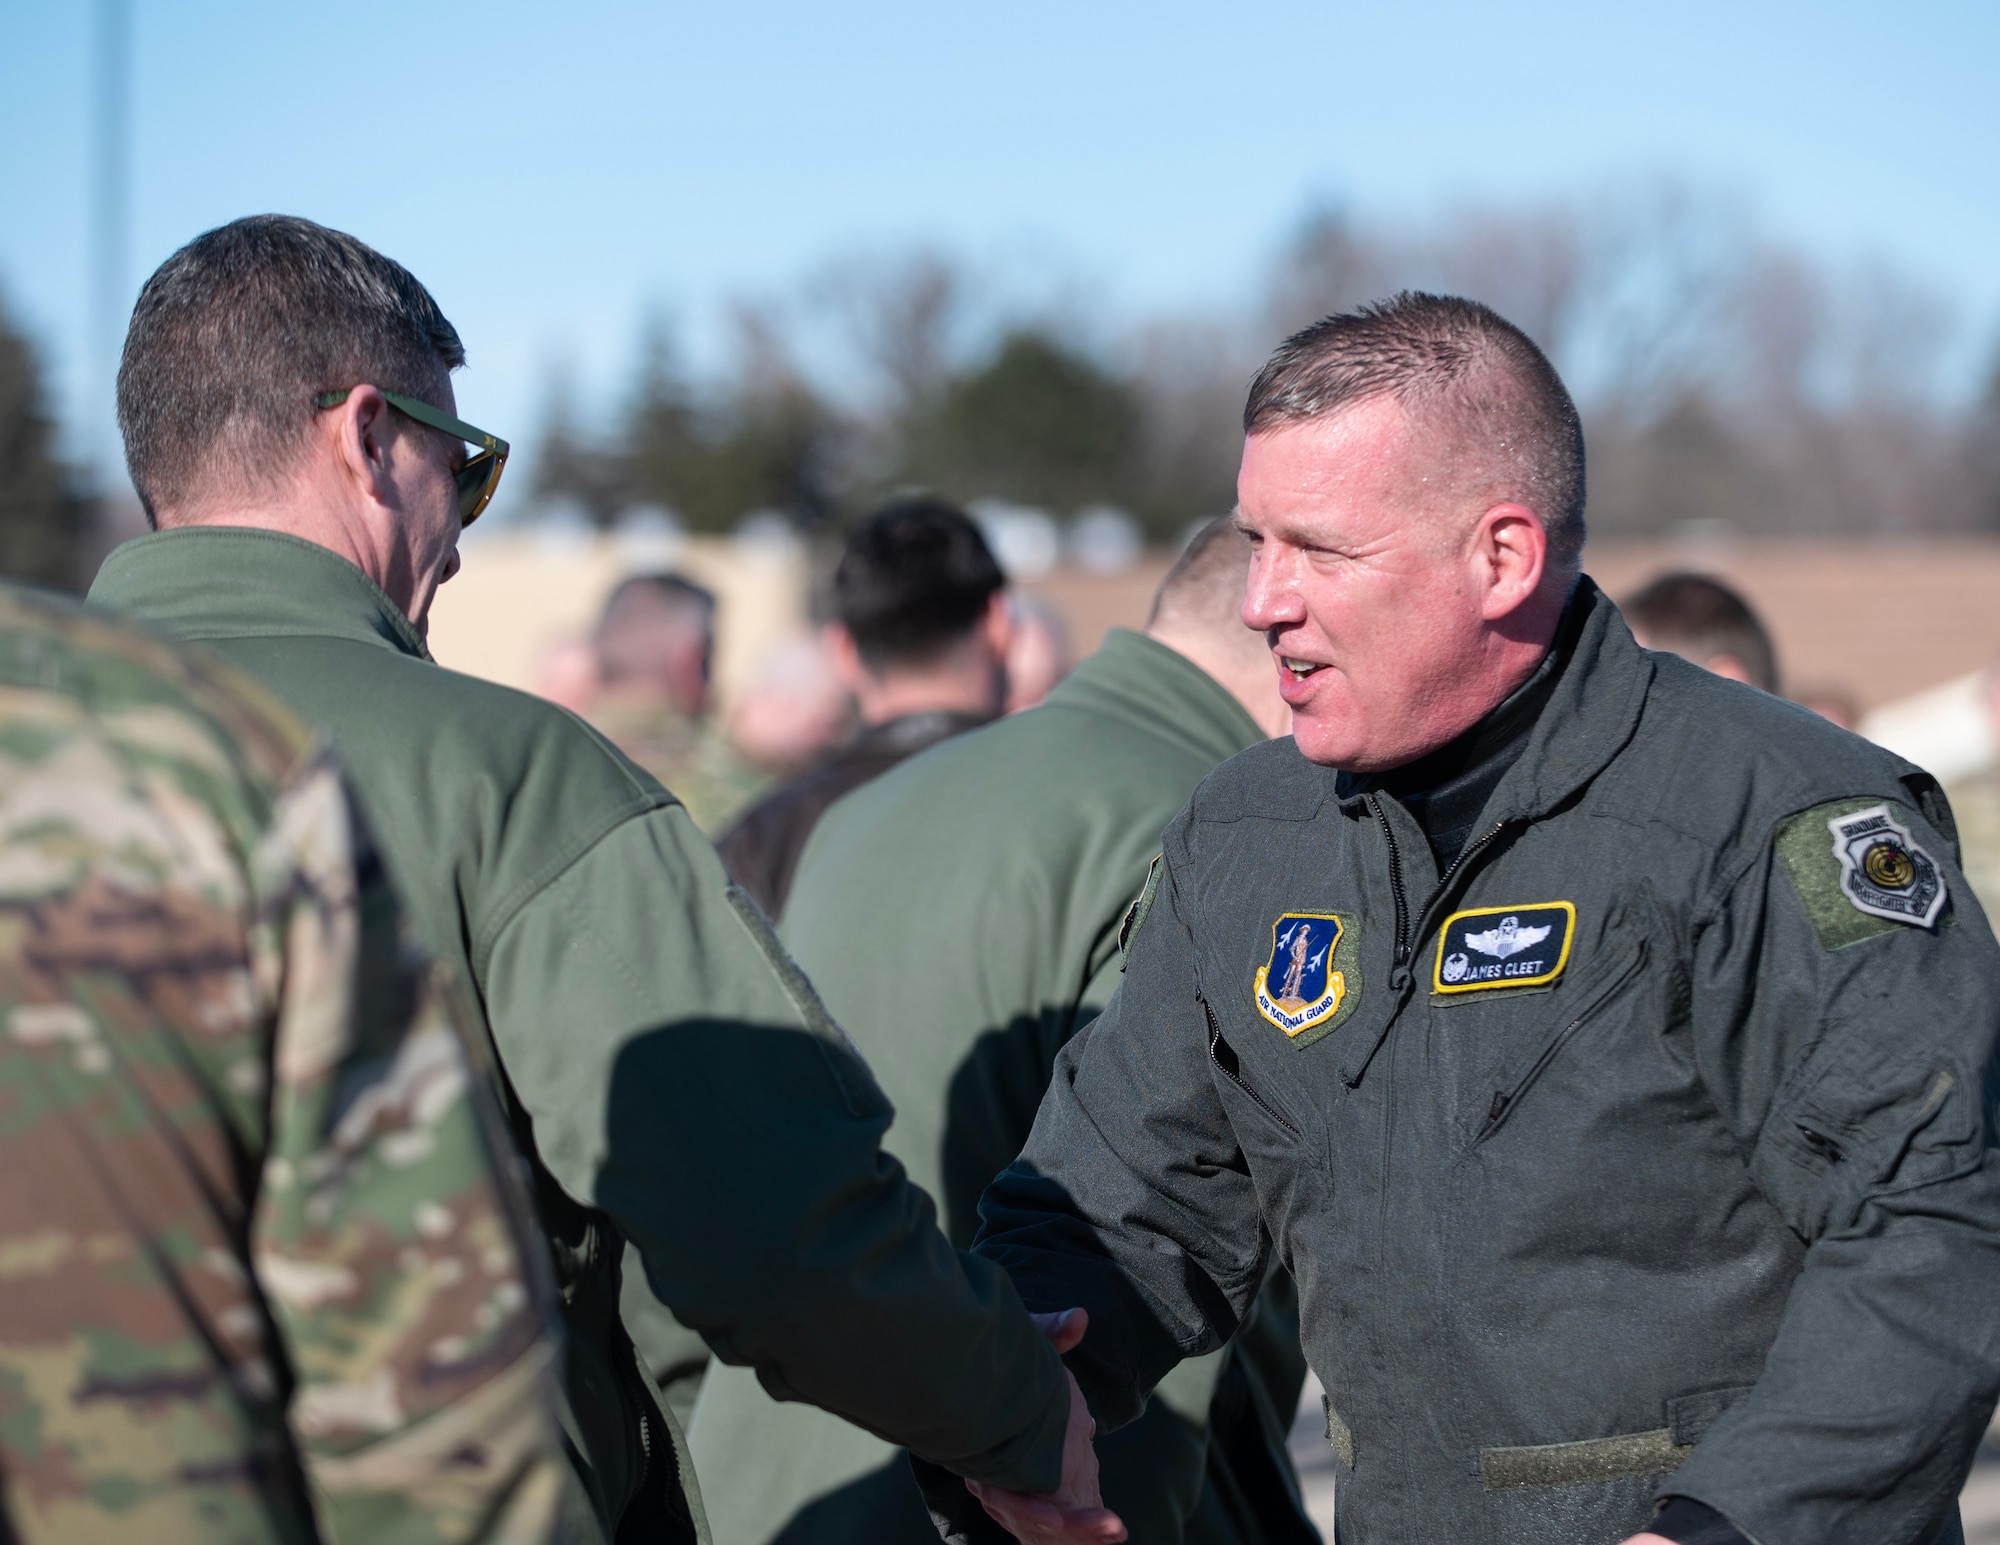 U.S. Air Force Airmen from the 133rd Airlift Wing congratulate U.S. Air Force Col. James Cleet after completing his fini-flight in St. Paul, Minn., Feb. 13, 2023